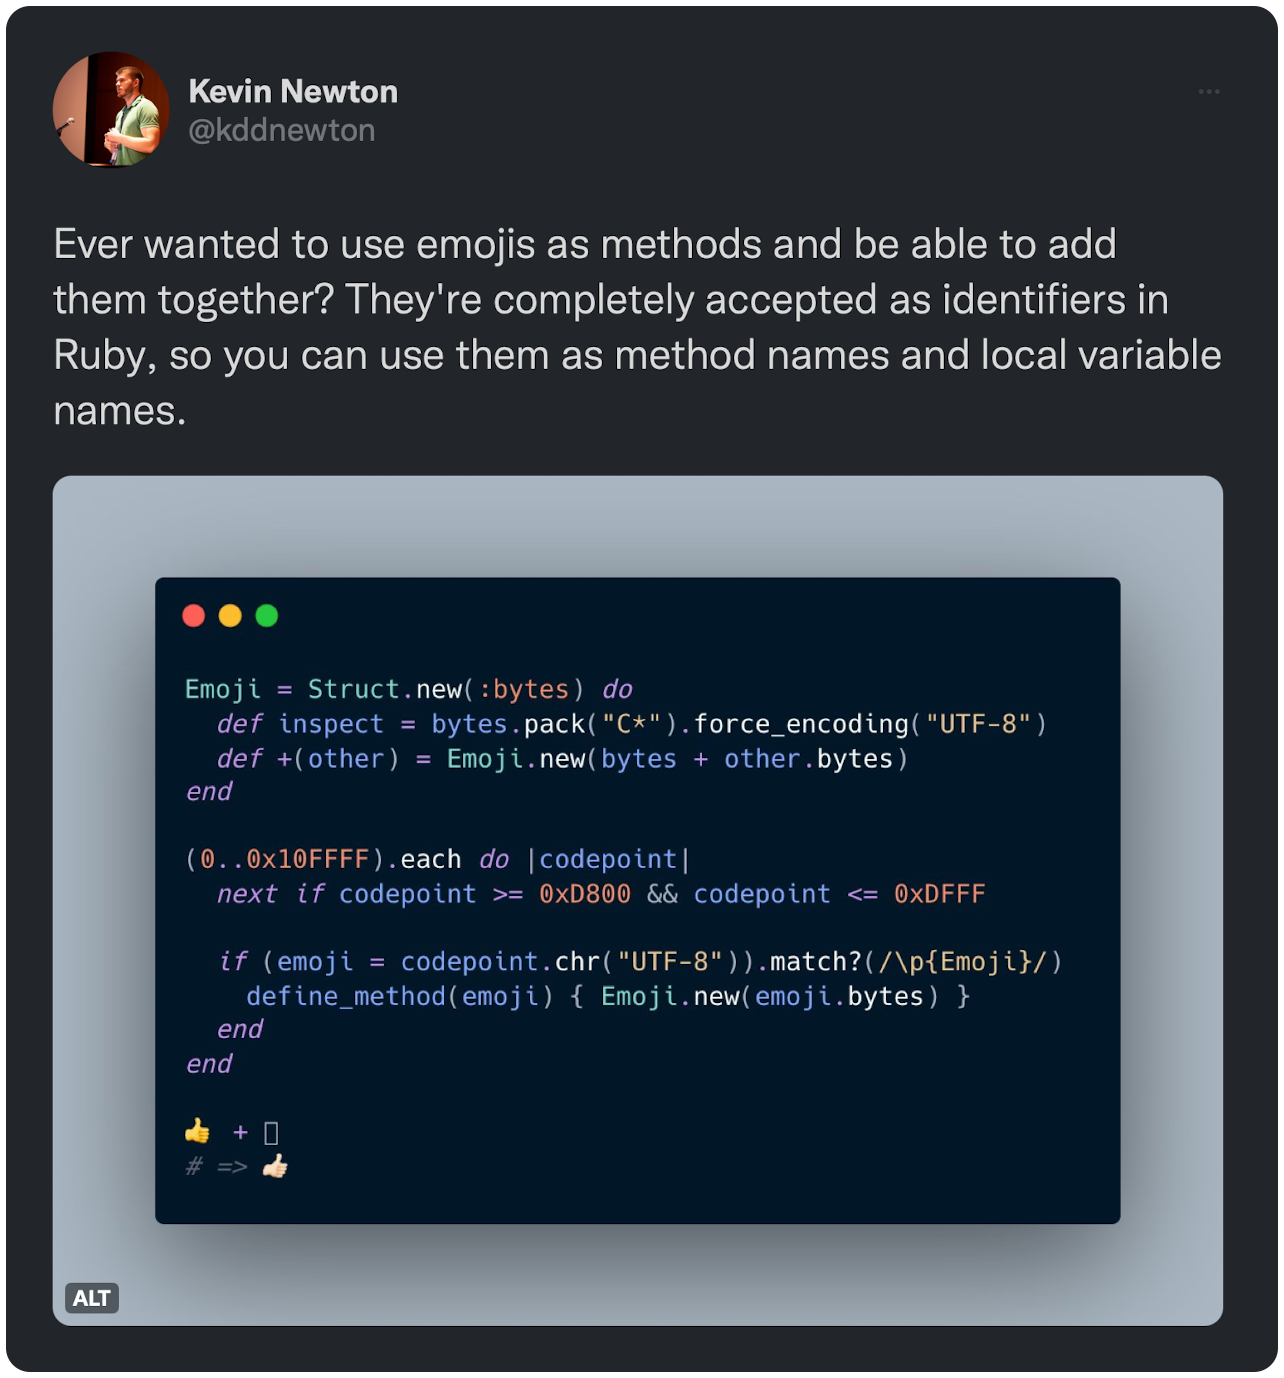 Ever wanted to use emojis as methods and be able to add them together? They're completely accepted as identifiers in Ruby, so you can use them as method names and local variable names.